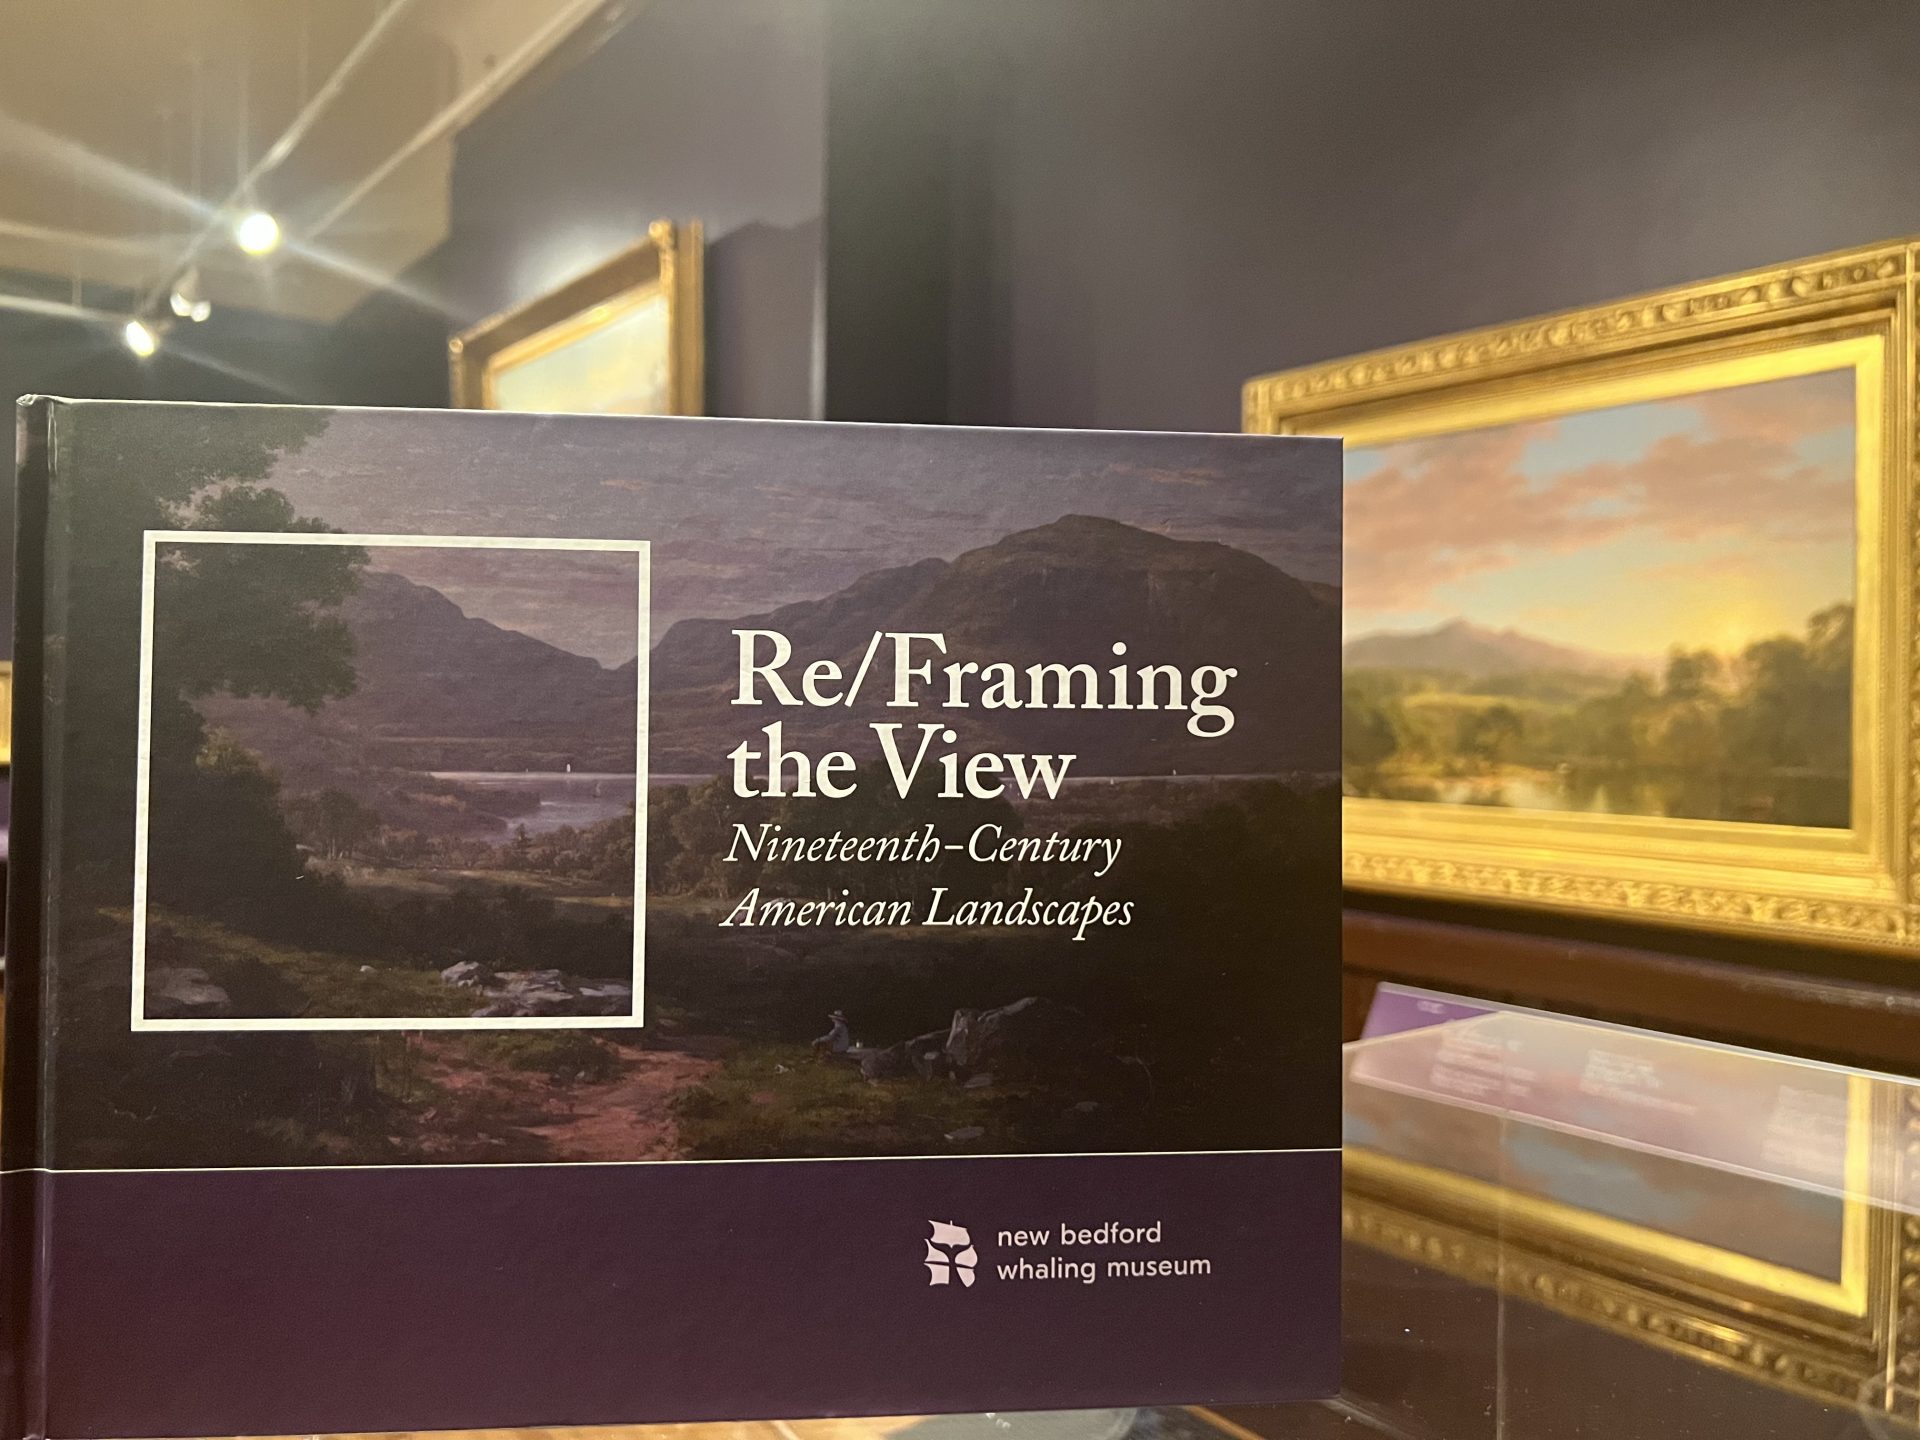 An image of the book "Re/Framing the View: Nineteenth-Century American Landscapes" in its gallery.